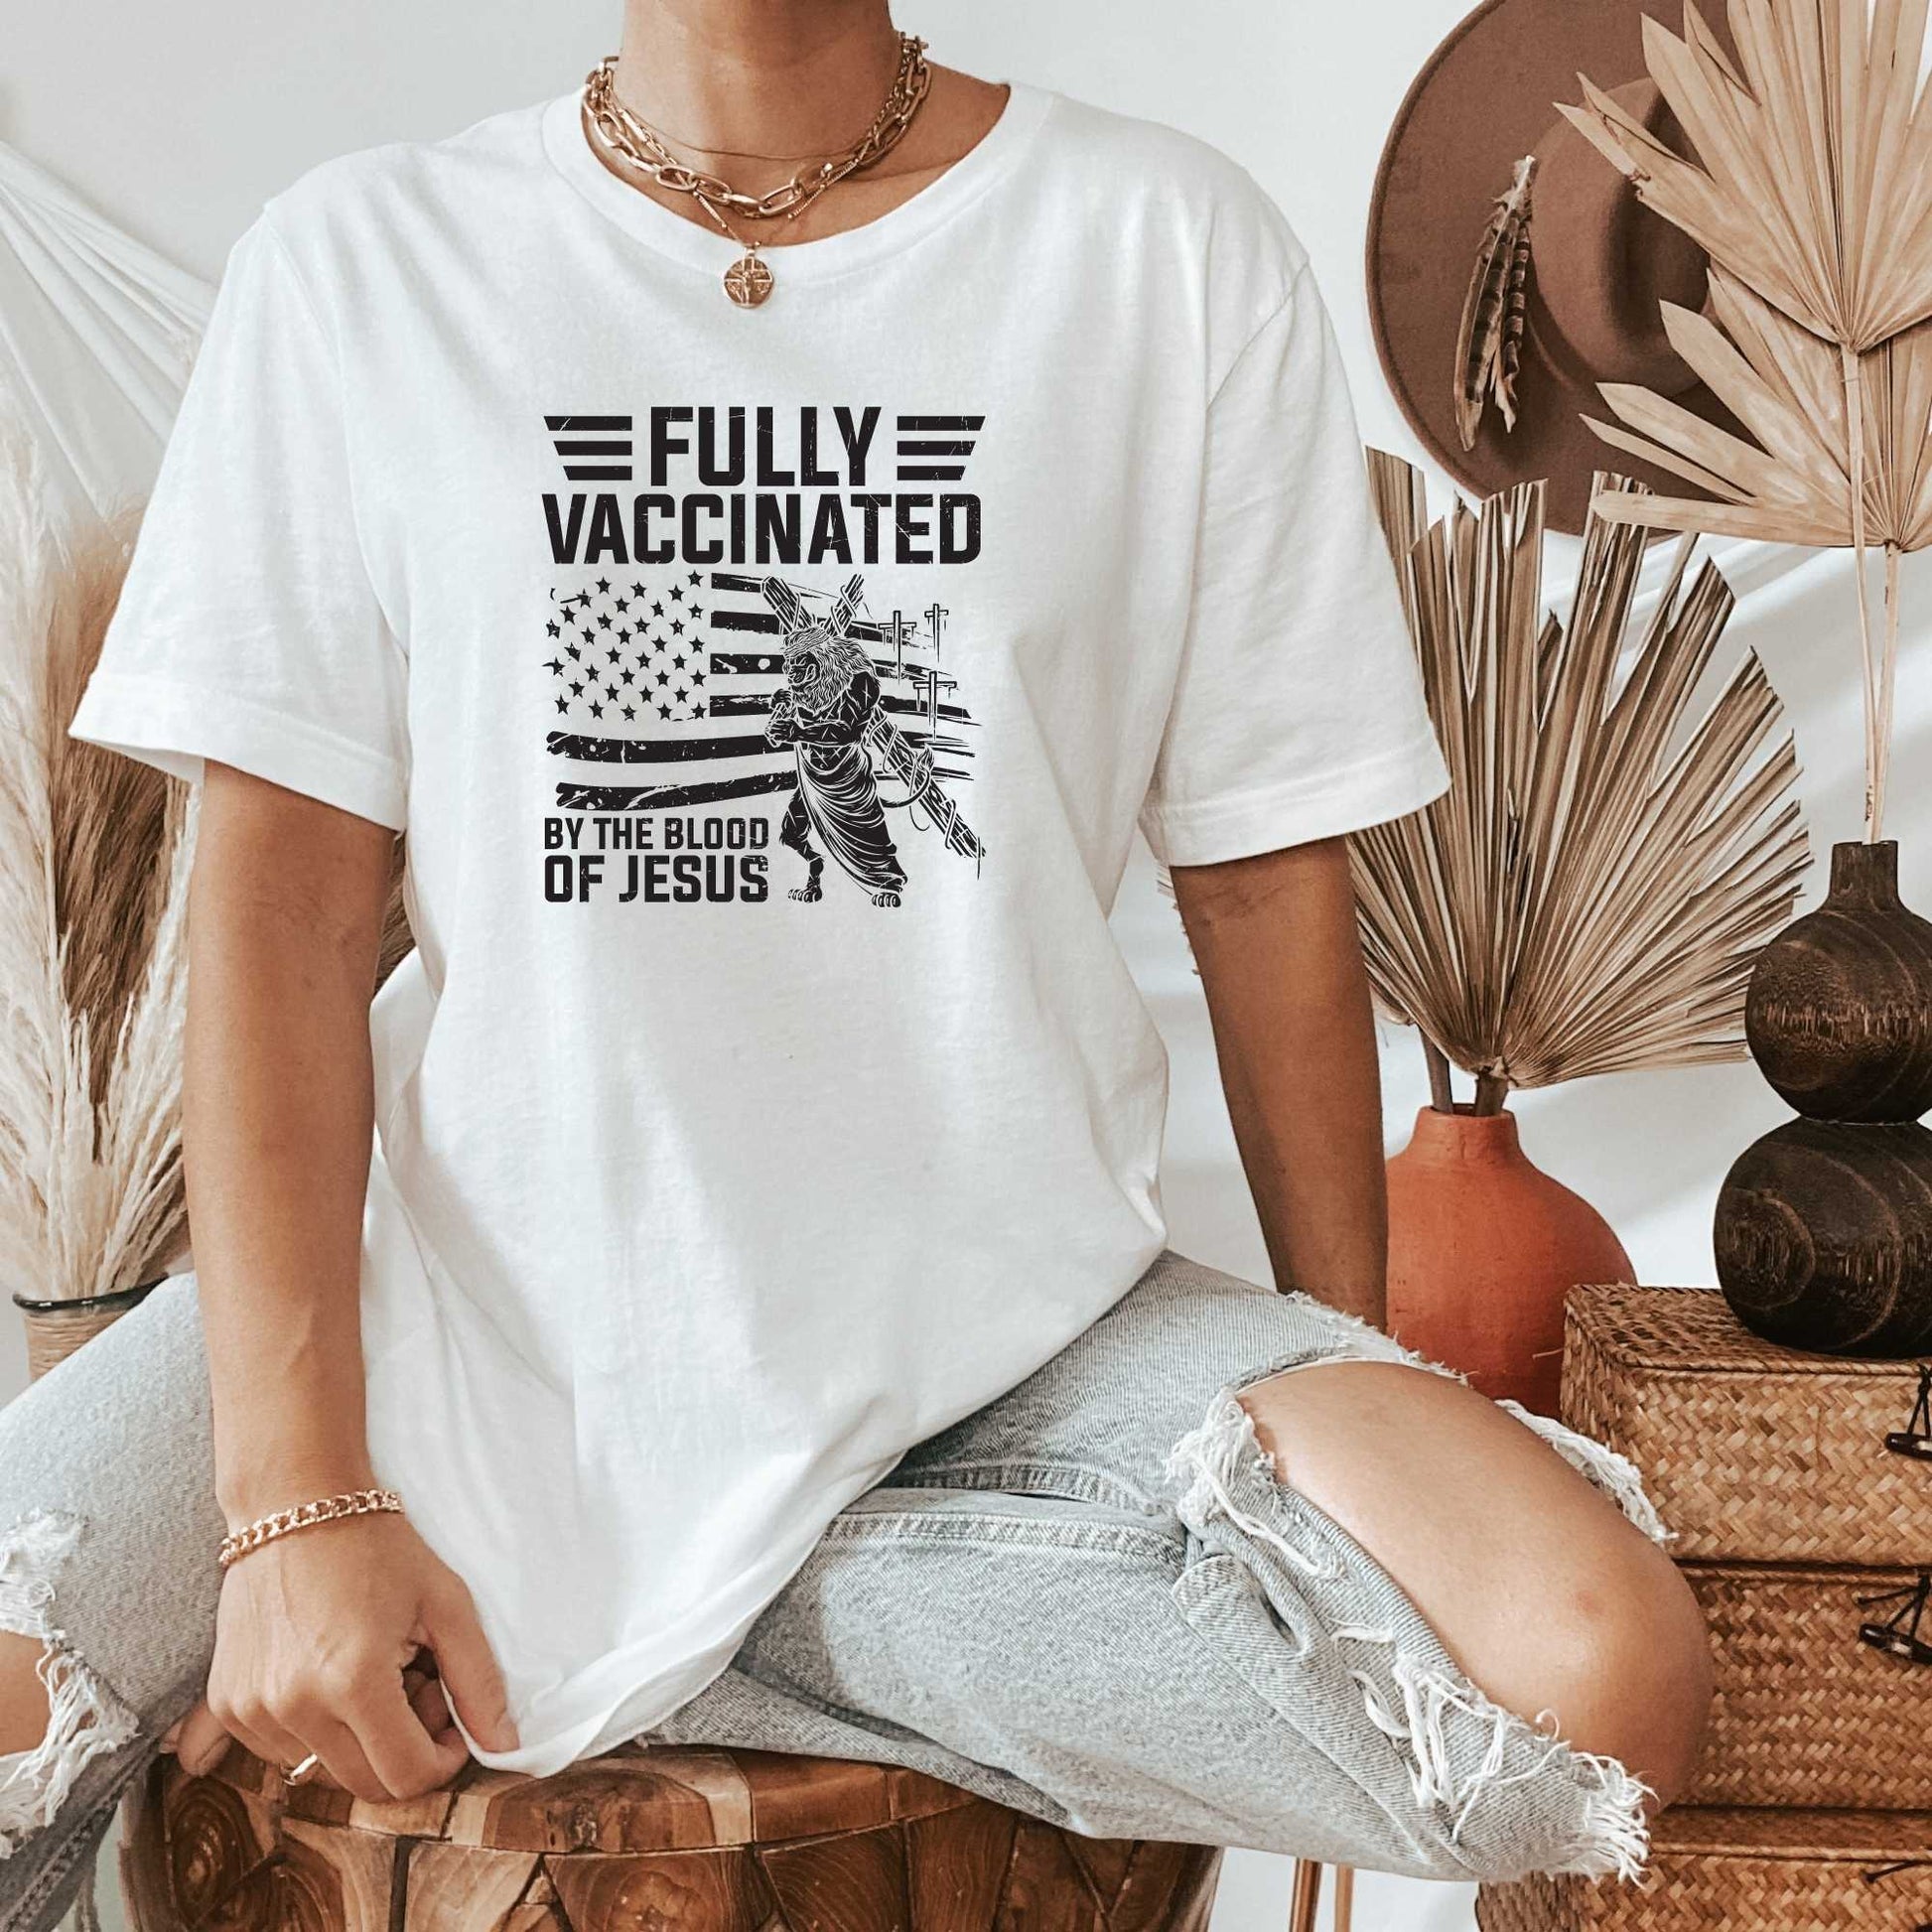 Fully Vaccinated By the Blood of Jesus Shirt about God